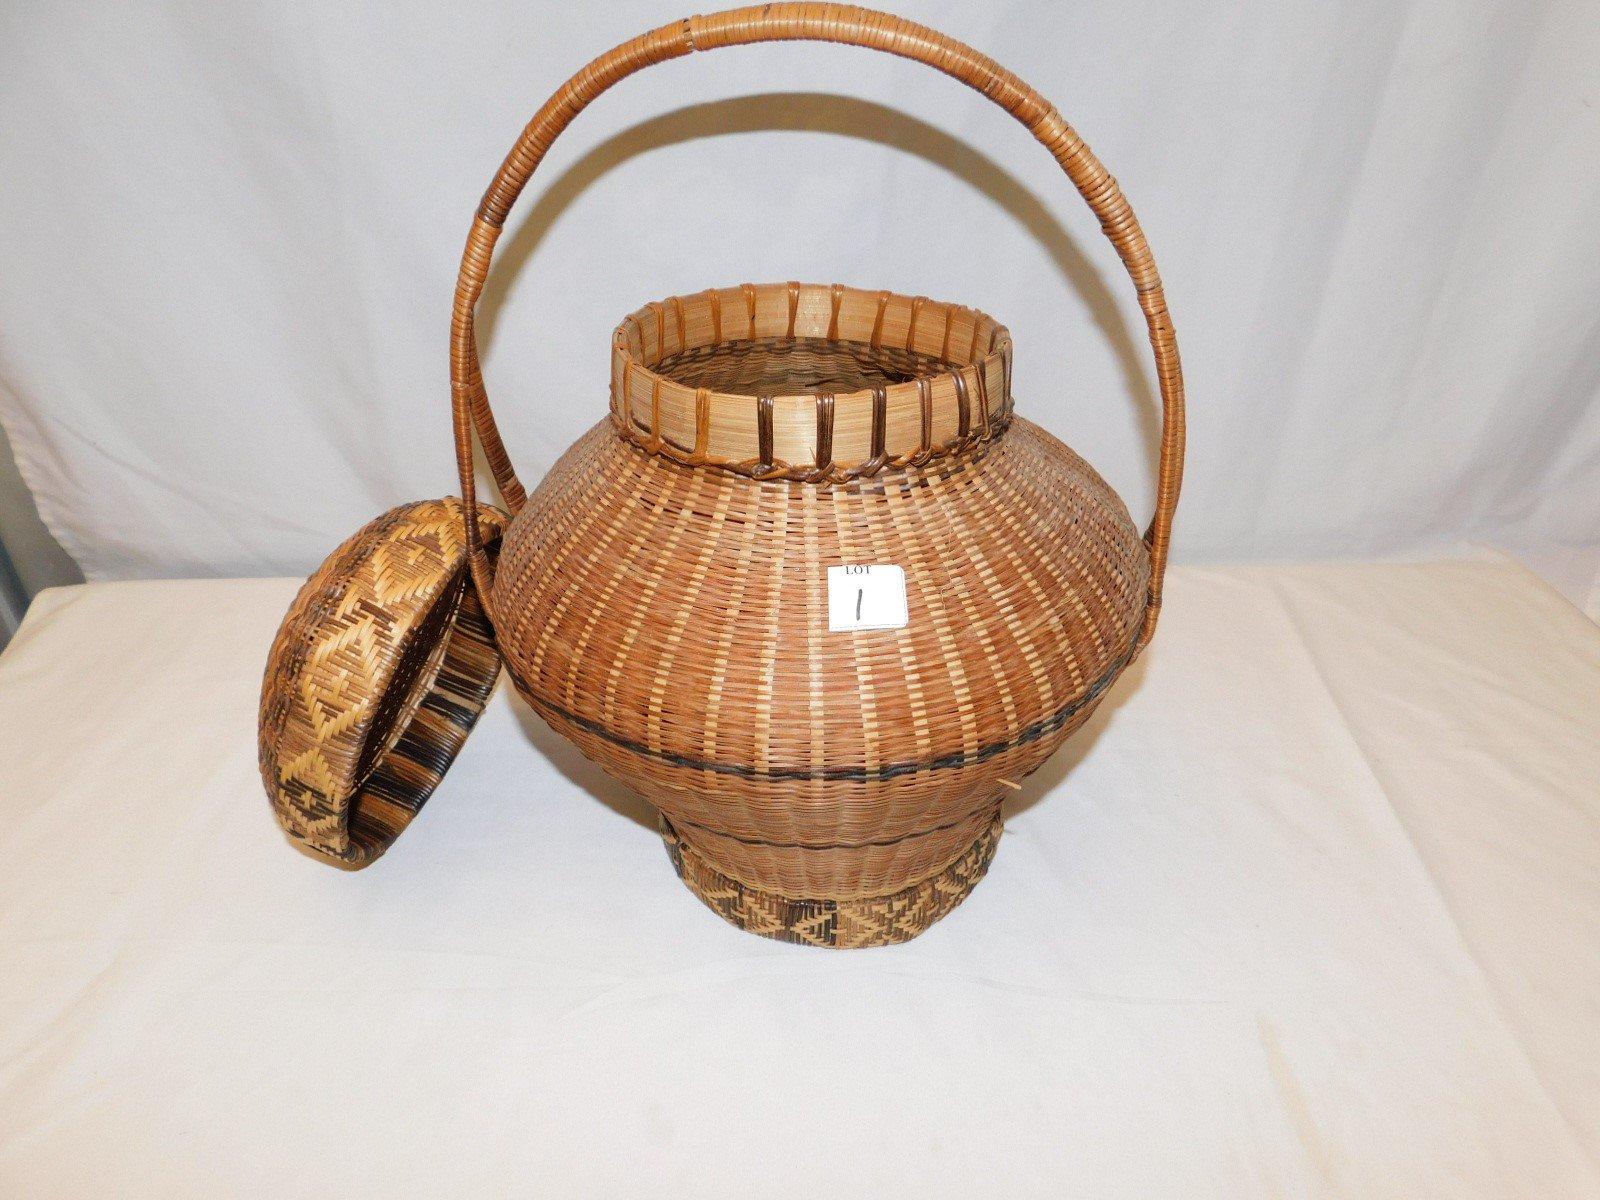 WOVEN BASKET; CIRRCA 1890 COVERED INDIAN BASKET, 17" TALL X 14" WIDE AT THE